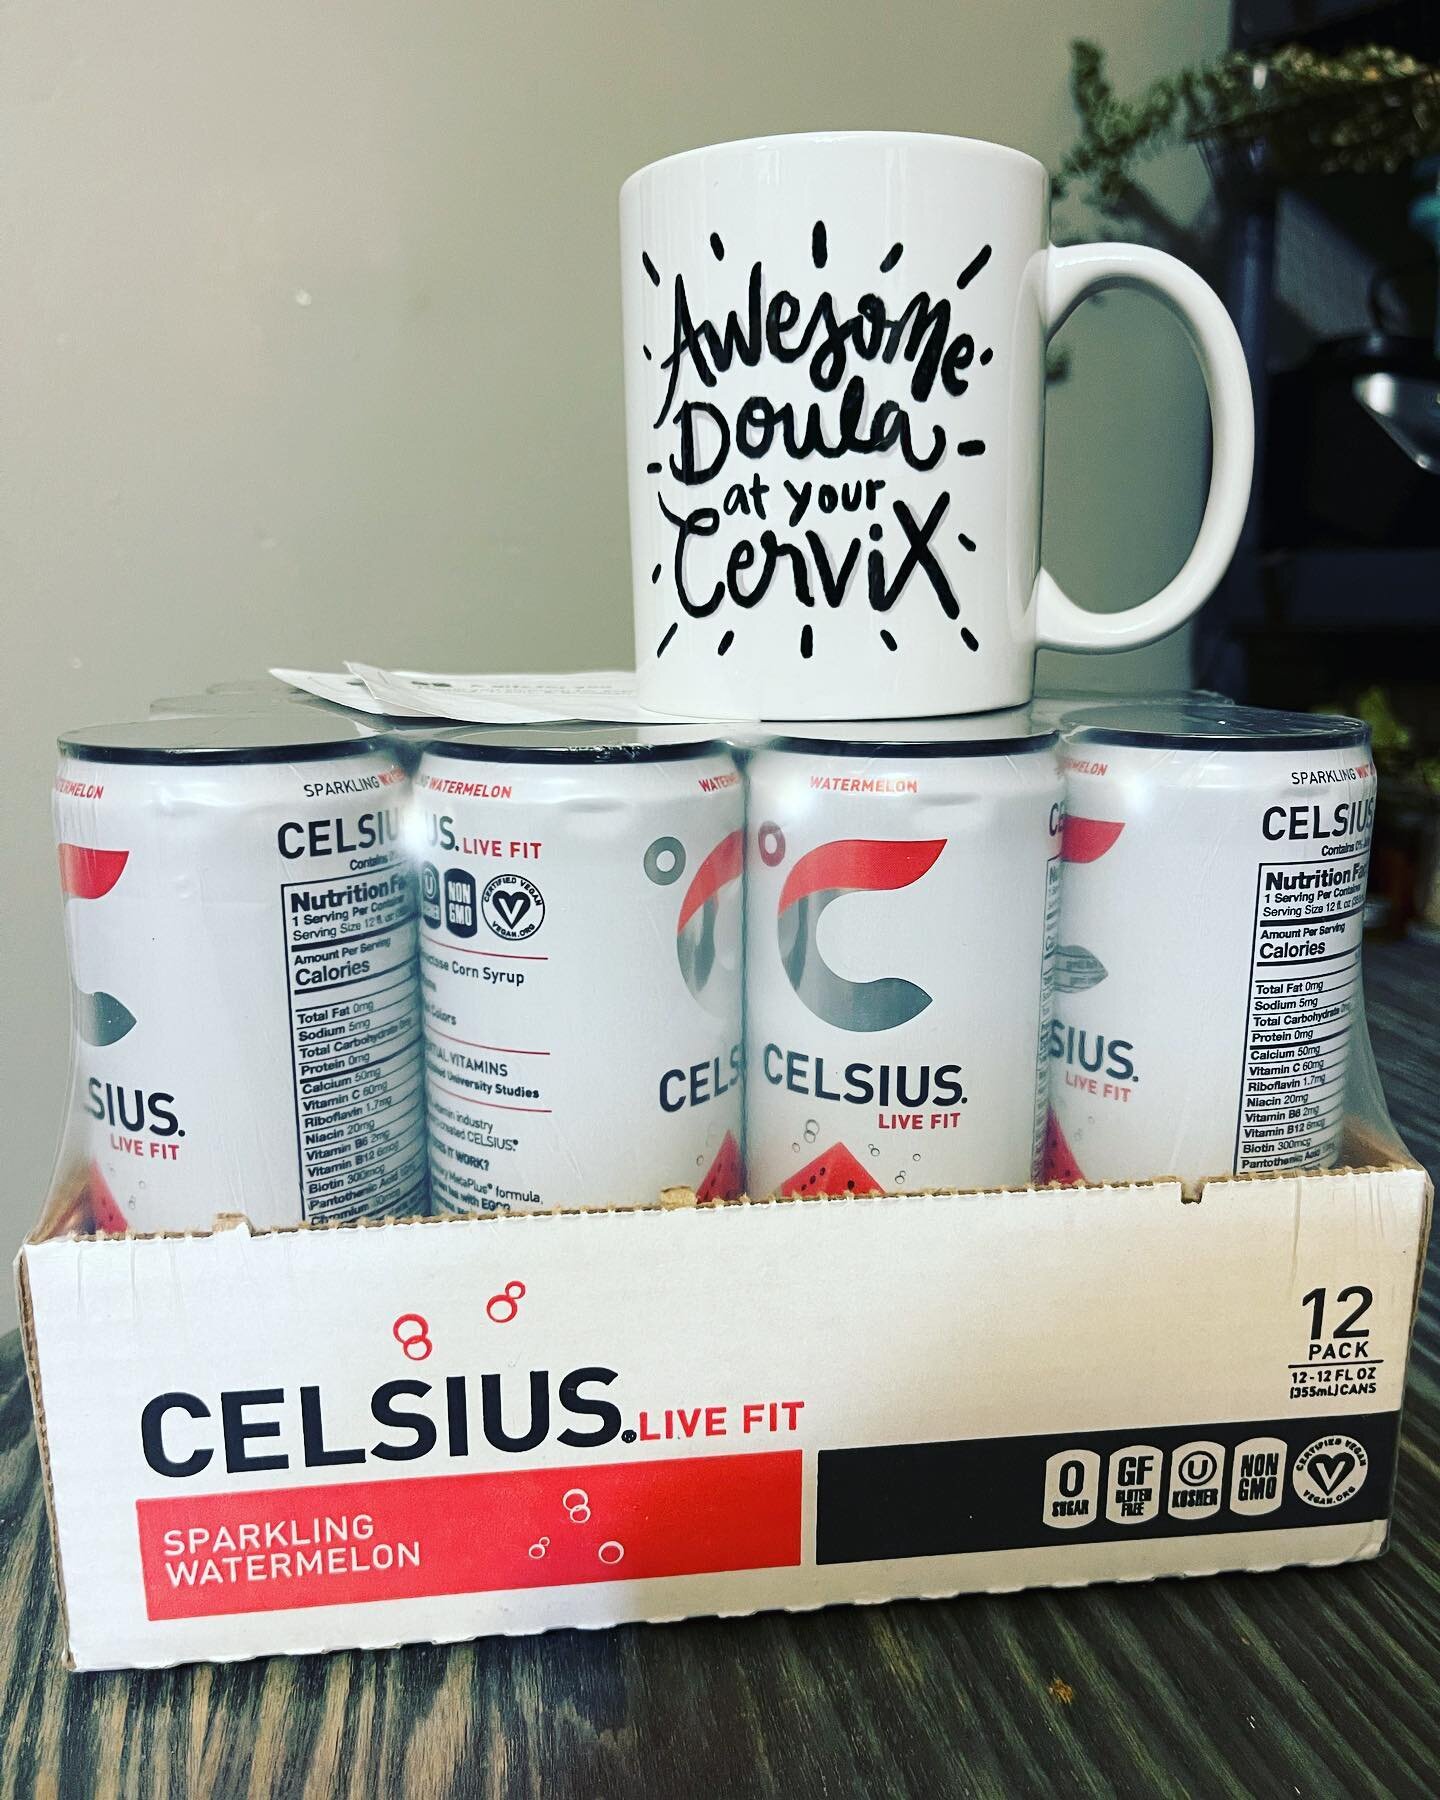 I got this sweet gift in the mail from a recent client @melmarie_photographs watermelon Celsius gets me through long birth; they are my favorite 🍉 and this mug is absolutely adorable, I love it! ☕️ I love my clients so much and am so thankful that t